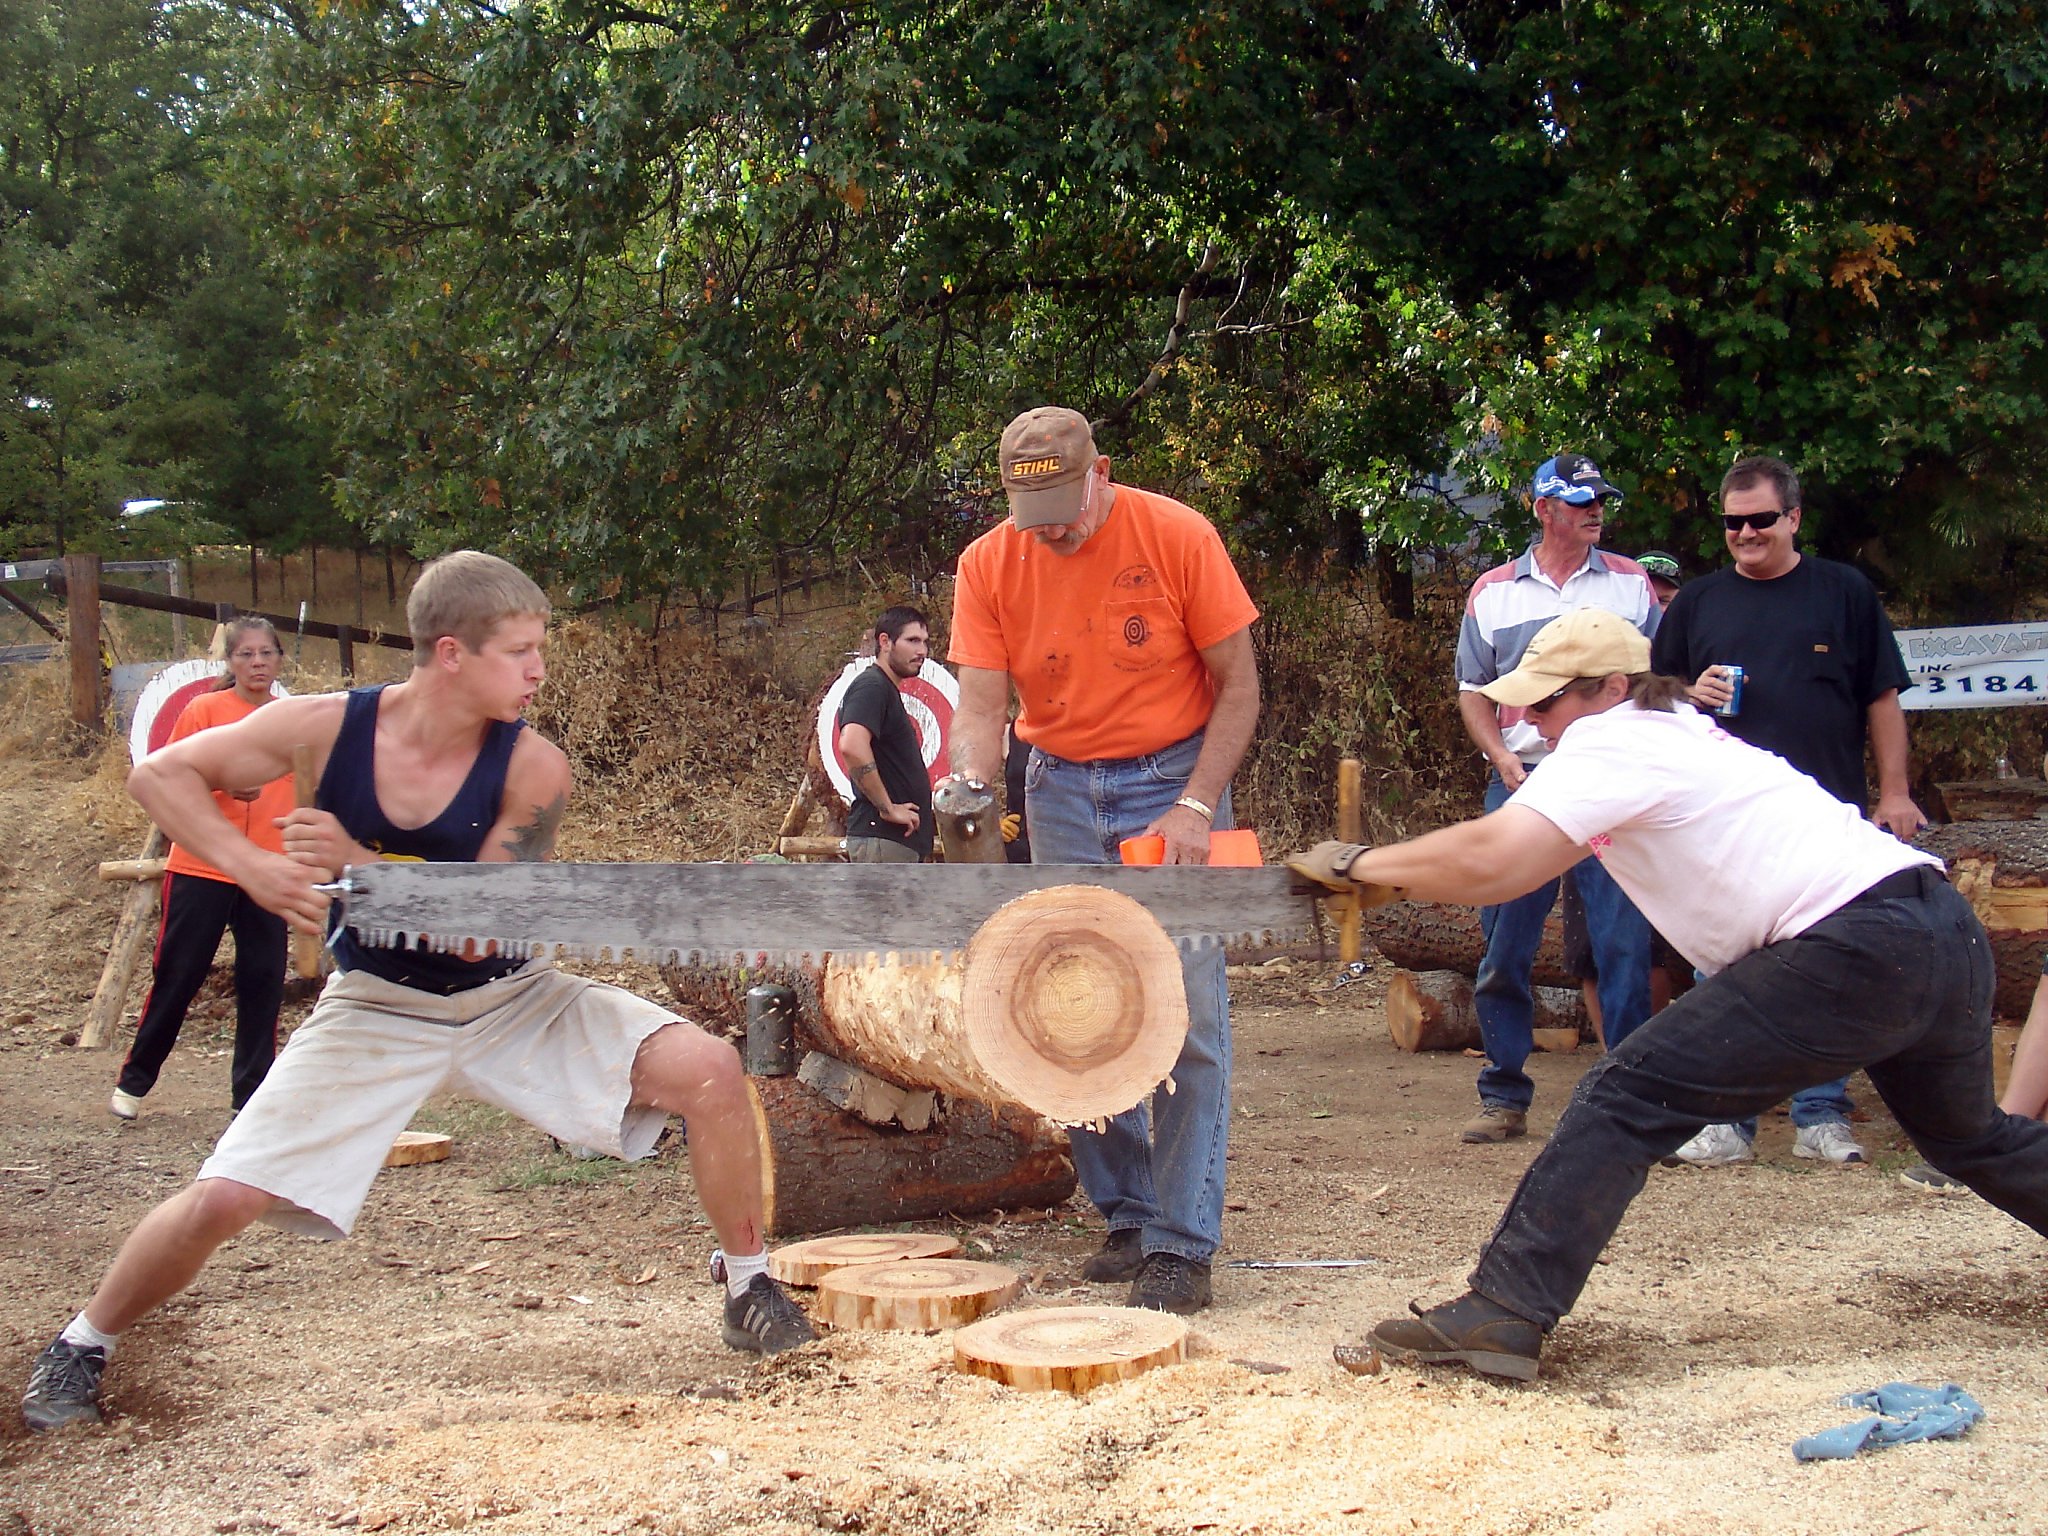 Calaveras oiling up chain saws for Lumberjack Day - SFGate2048 x 1536